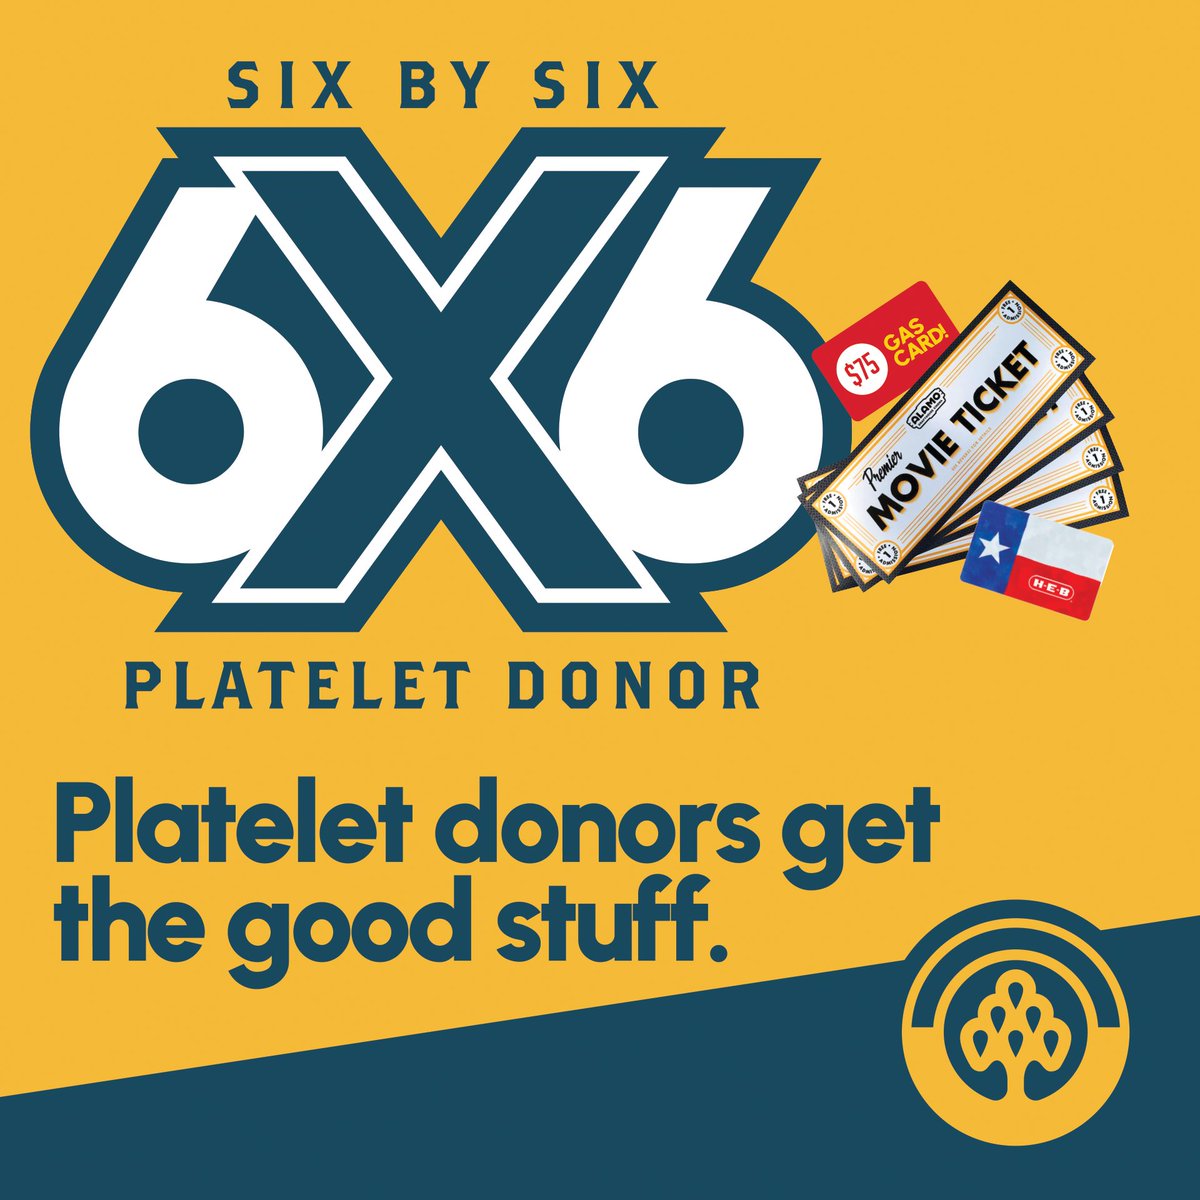 Donate platelets at least once a month for six consecutive months, and choose from three amazing rewards! If you're ready to start your journey and enjoy some fantastic perks, become a platelet donor today at weareblood.org/donor. 🌟🌟🌟 #WeAreBlood #PlateletDonors